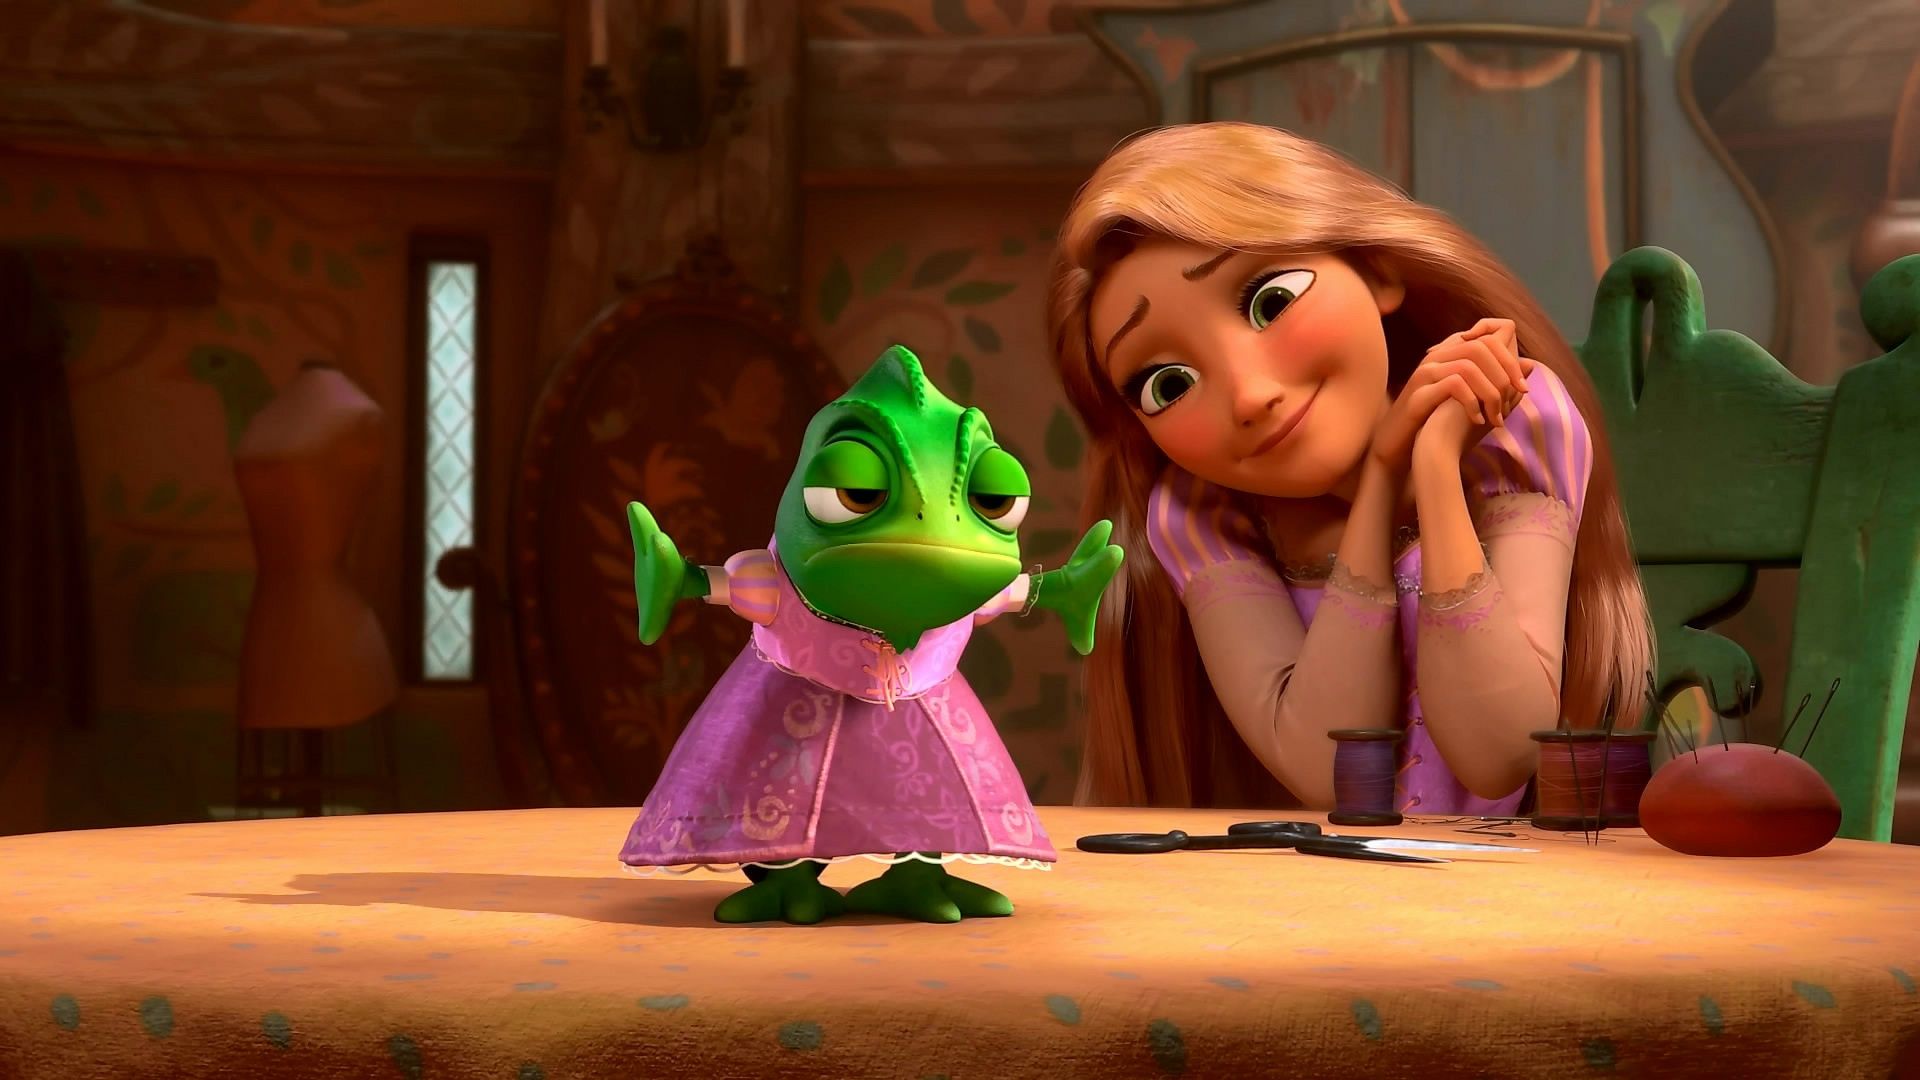 Wallpaper Tangled, Rapunzel with frog 1920x1080 Full HD 2K Picture, Image